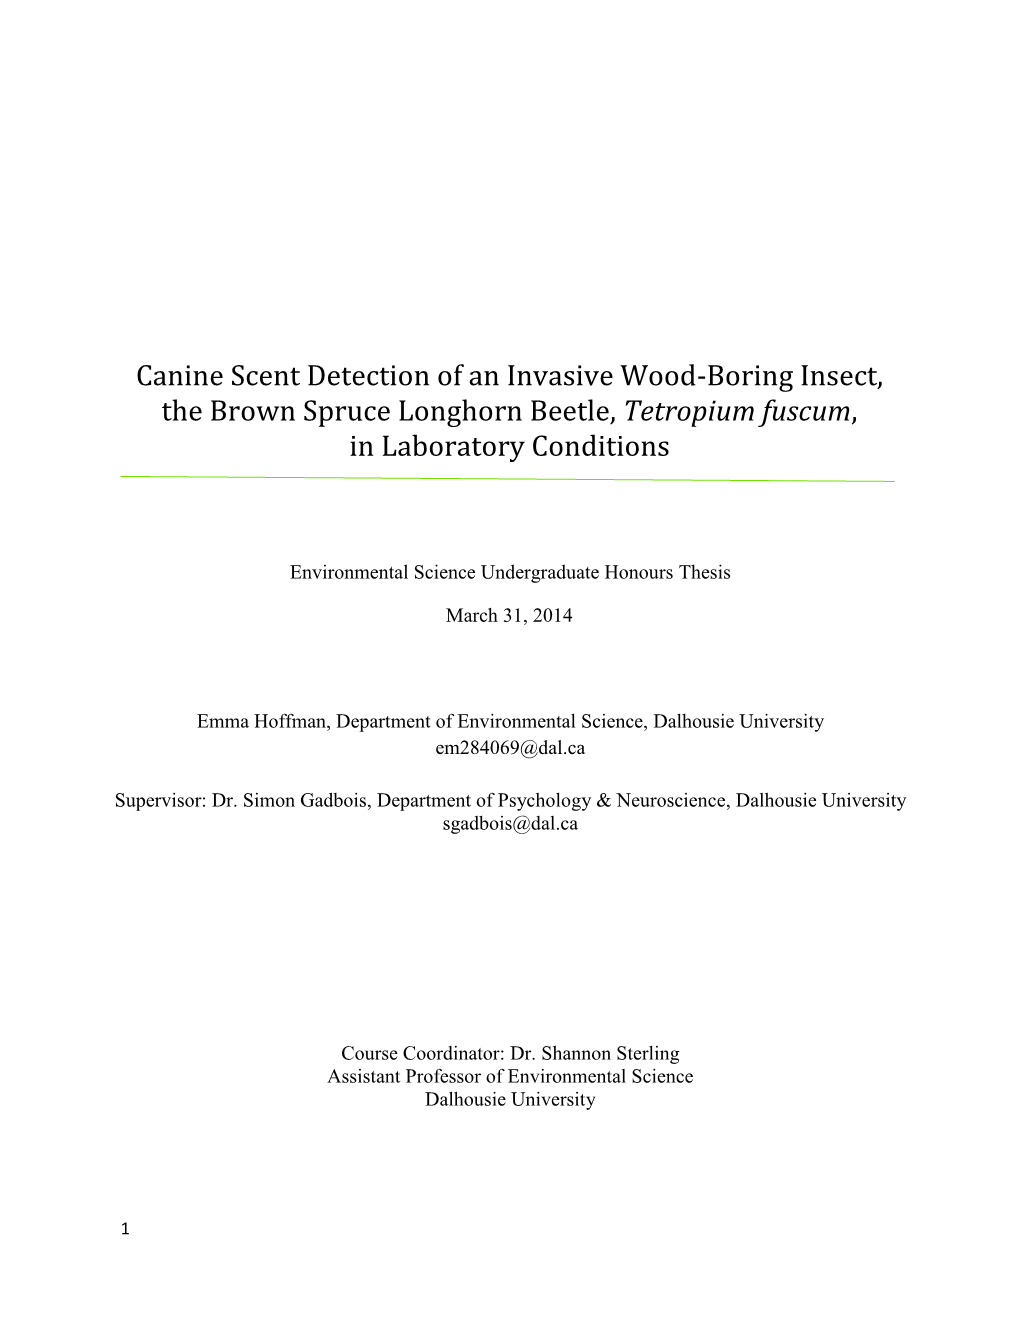 Canine Scent Detection of an Invasive Wood-Boring Insect, the Brown Spruce Longhorn Beetle, Tetropium Fuscum, in Laboratory Conditions